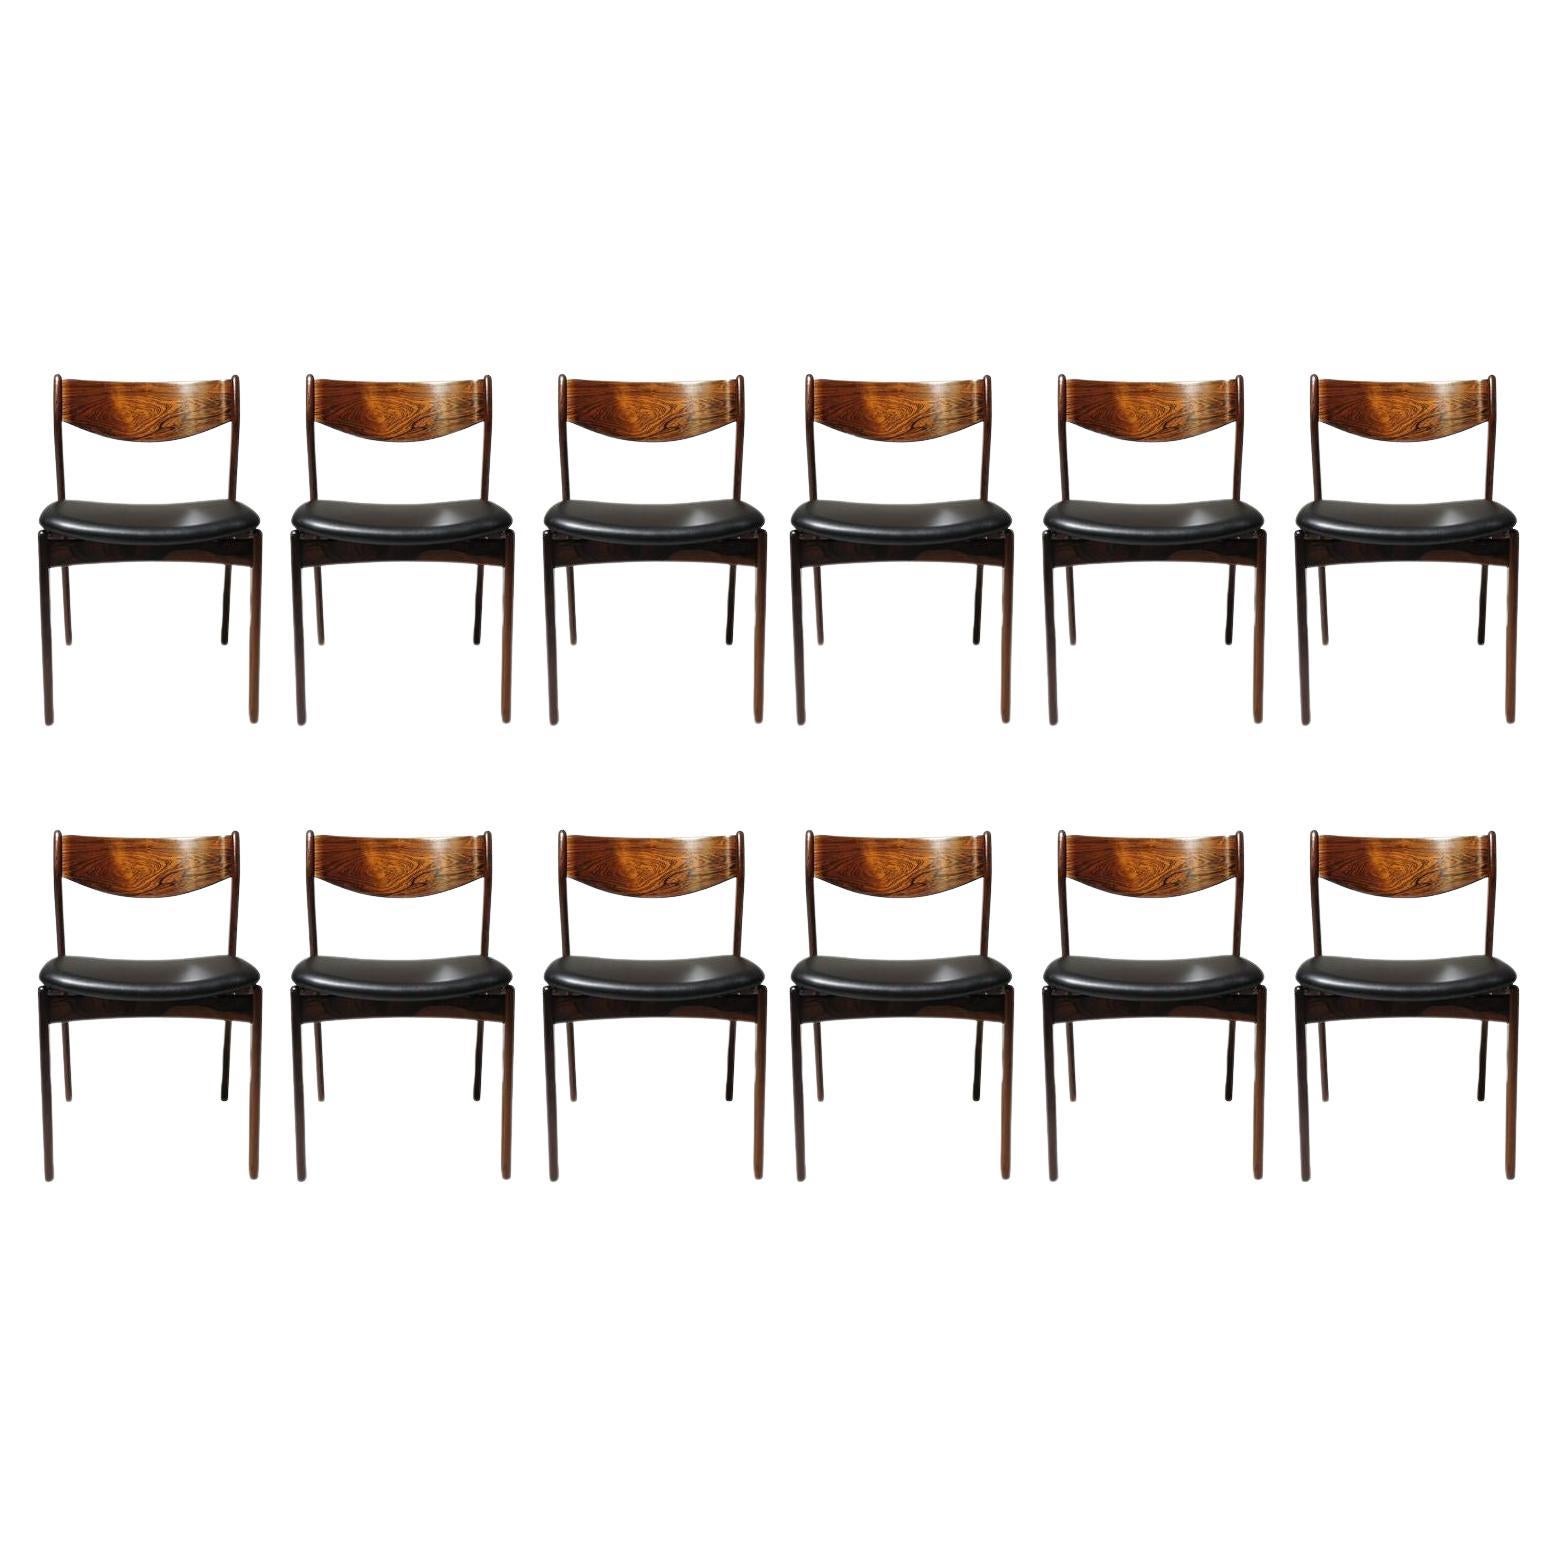 12 Brazilian Rosewood Pe Jorgensen Dining Chairs in New Black Leather